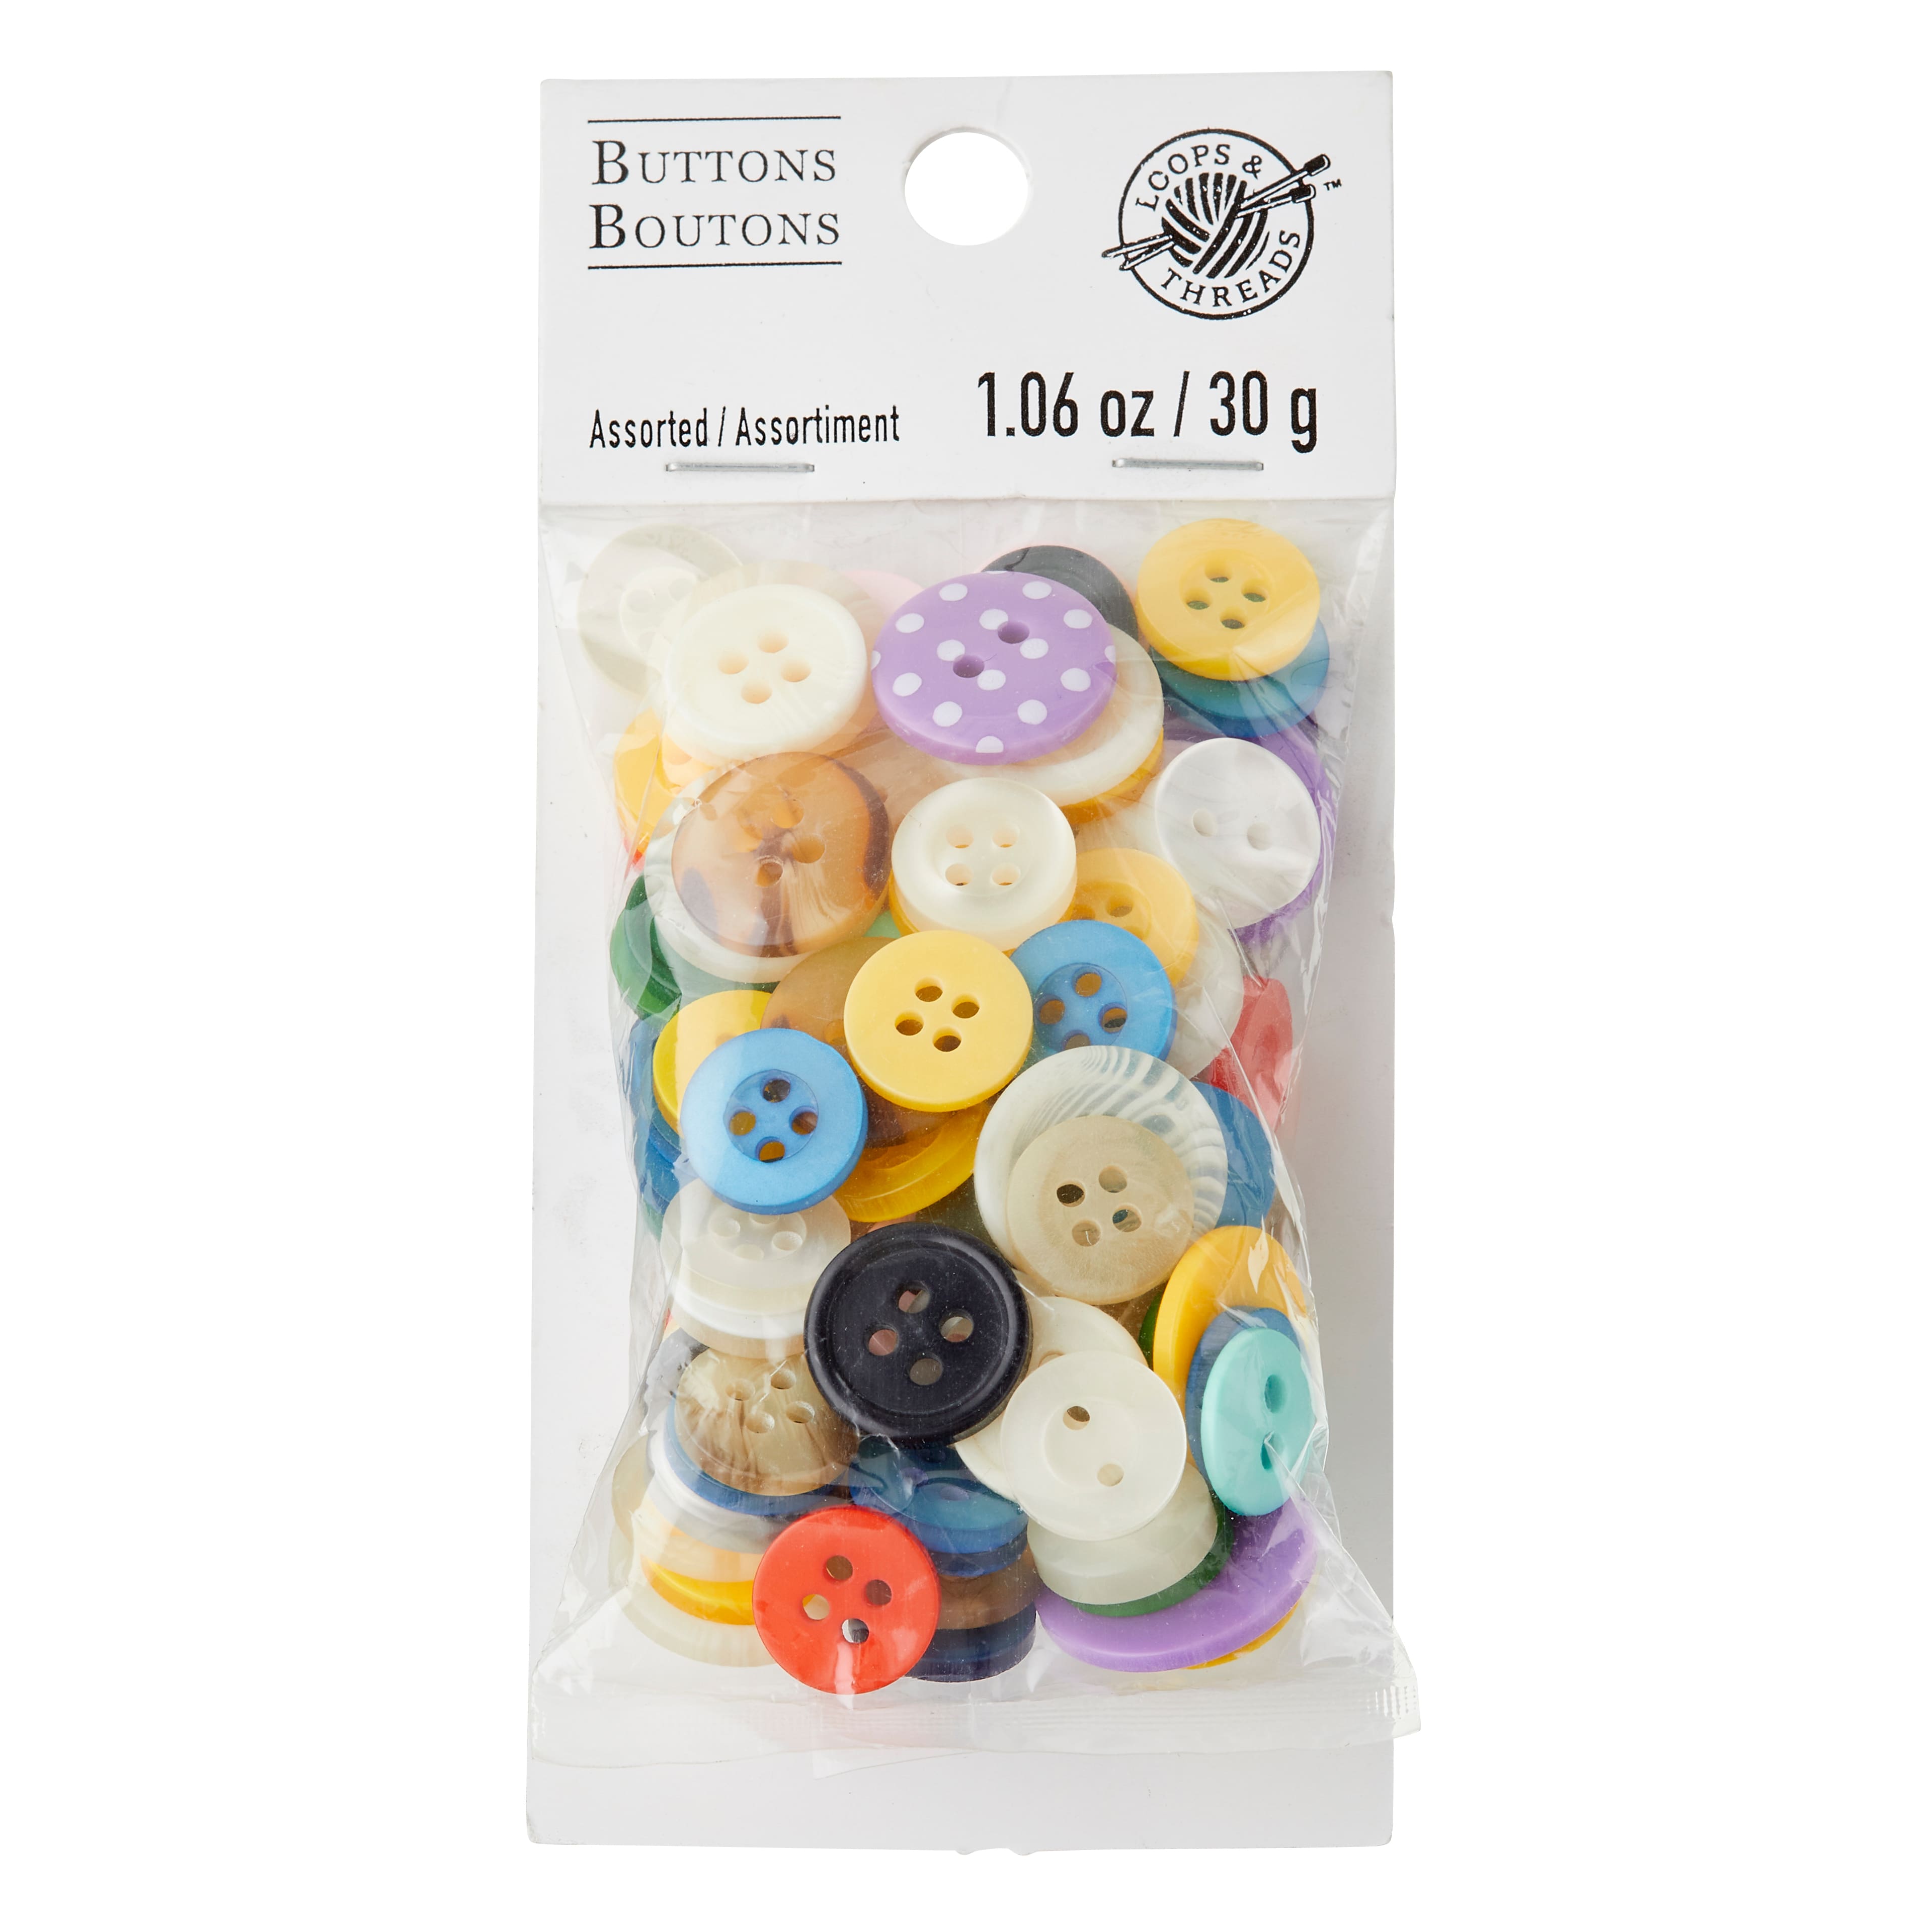 Buttons - 13mm, Hobby Lobby